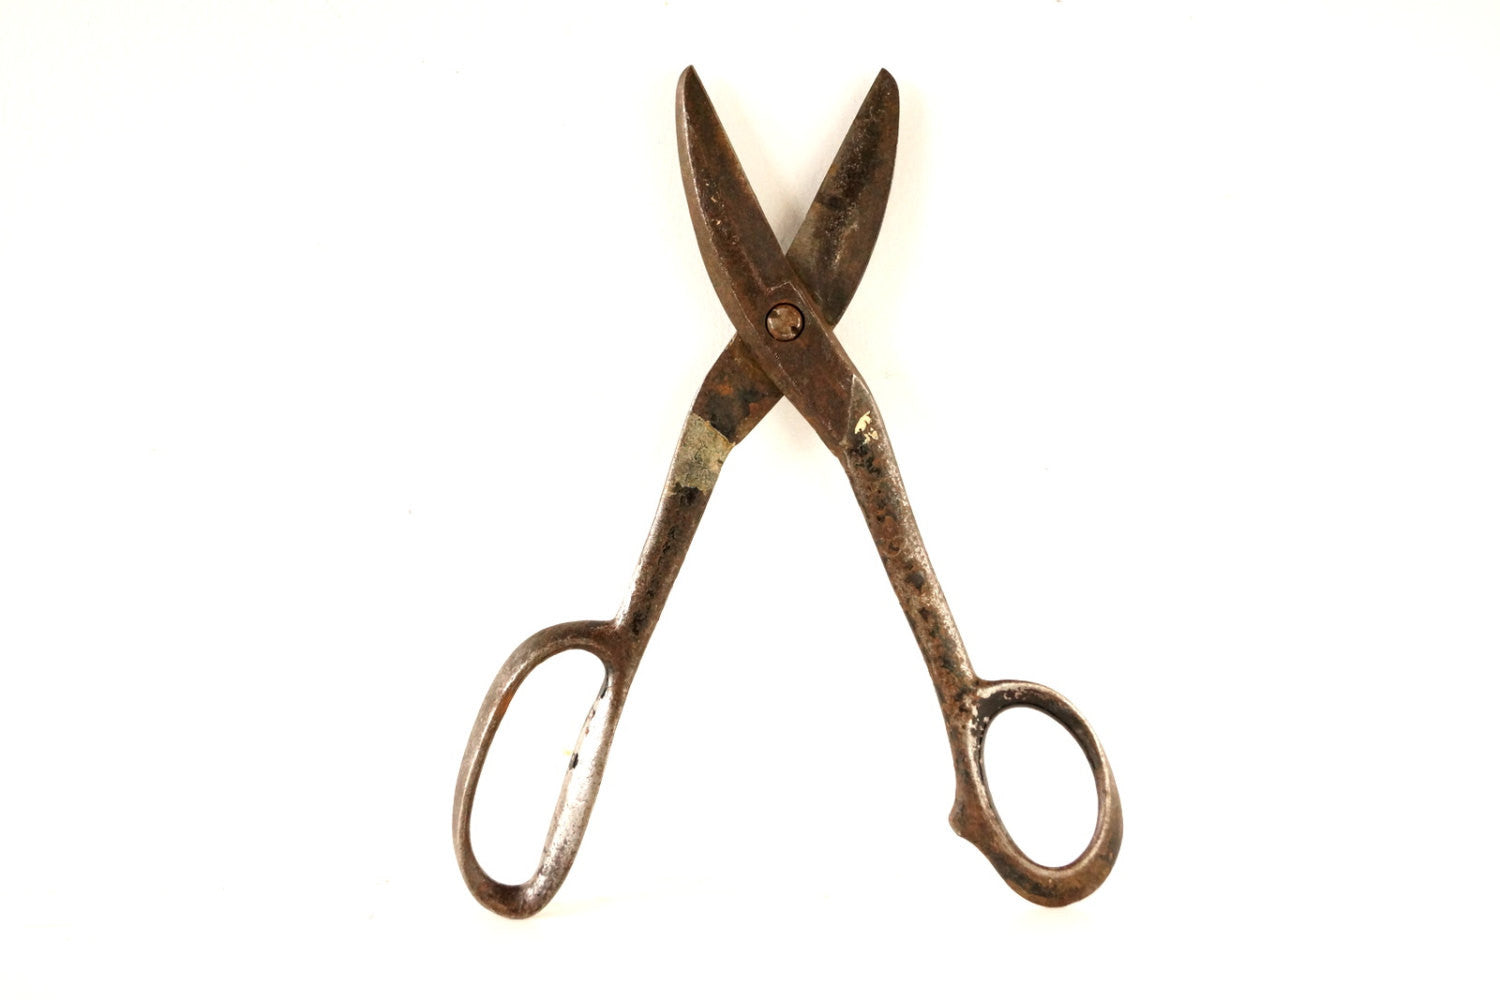 Vintage Metal Cutting Scissors On Wooden Stock Photo 2268010861